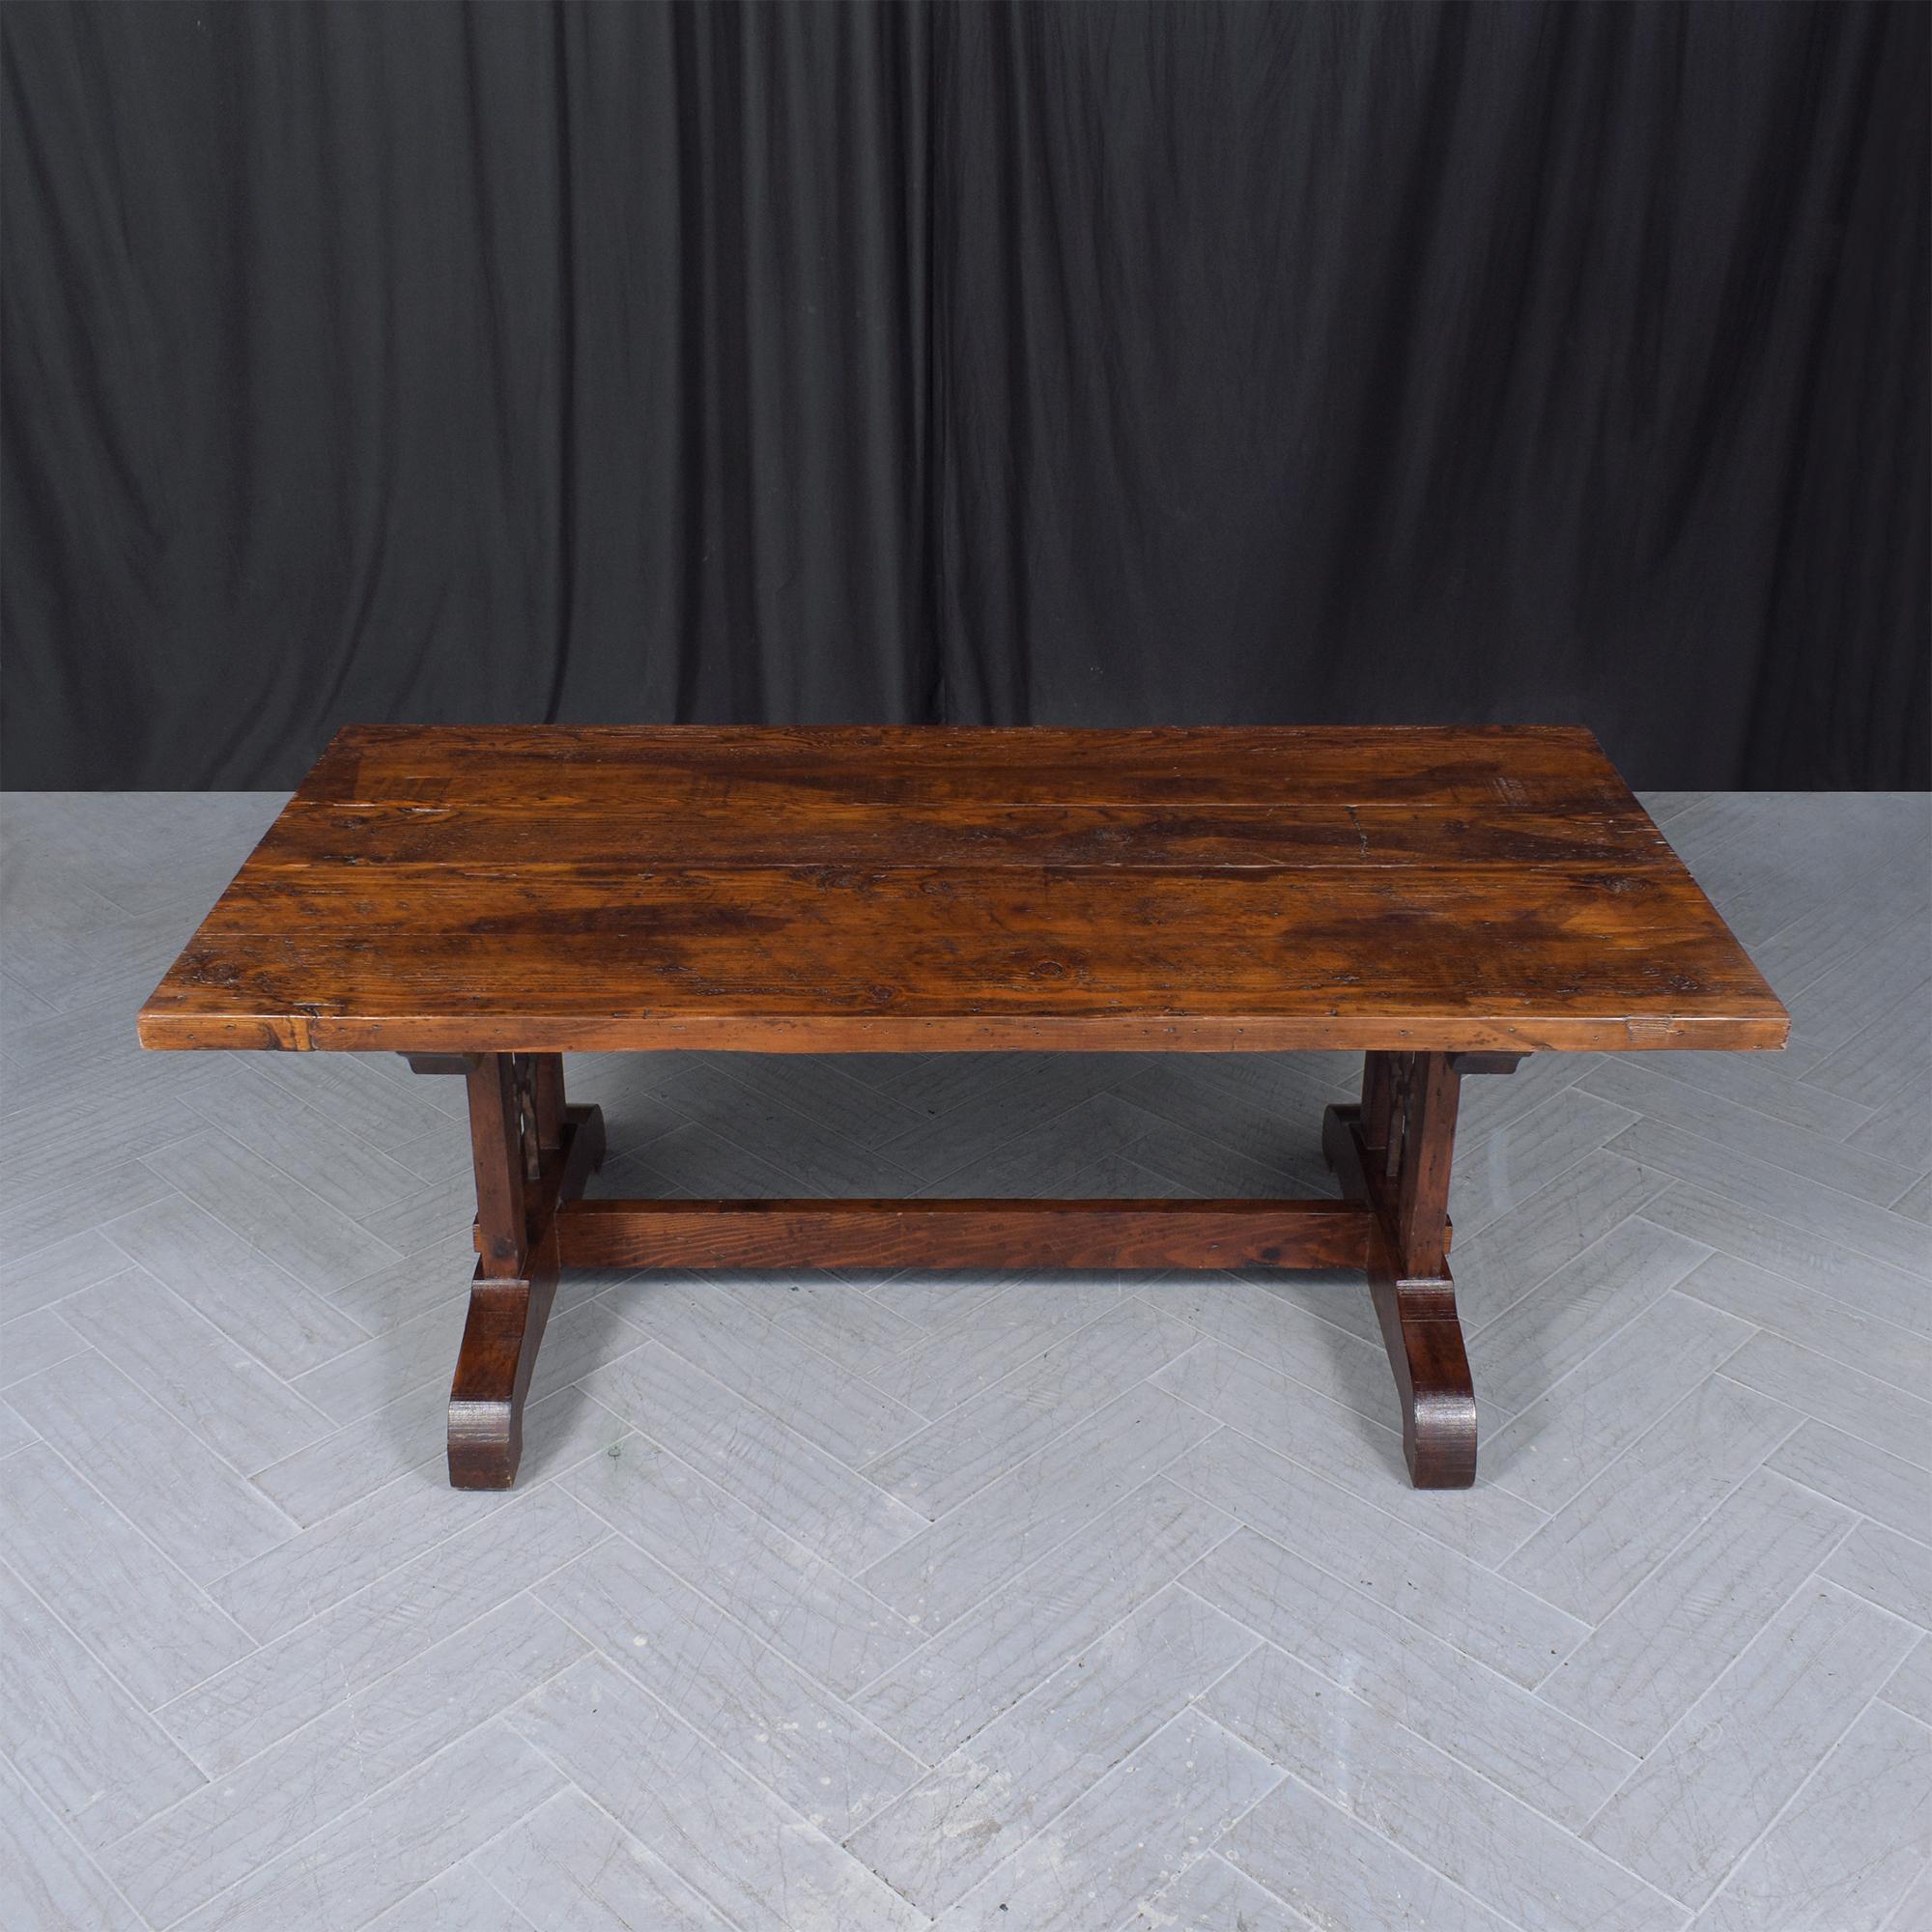 Vintage Solid Wood Dining Table with Iron Accents and Pedestal Legs For Sale 3